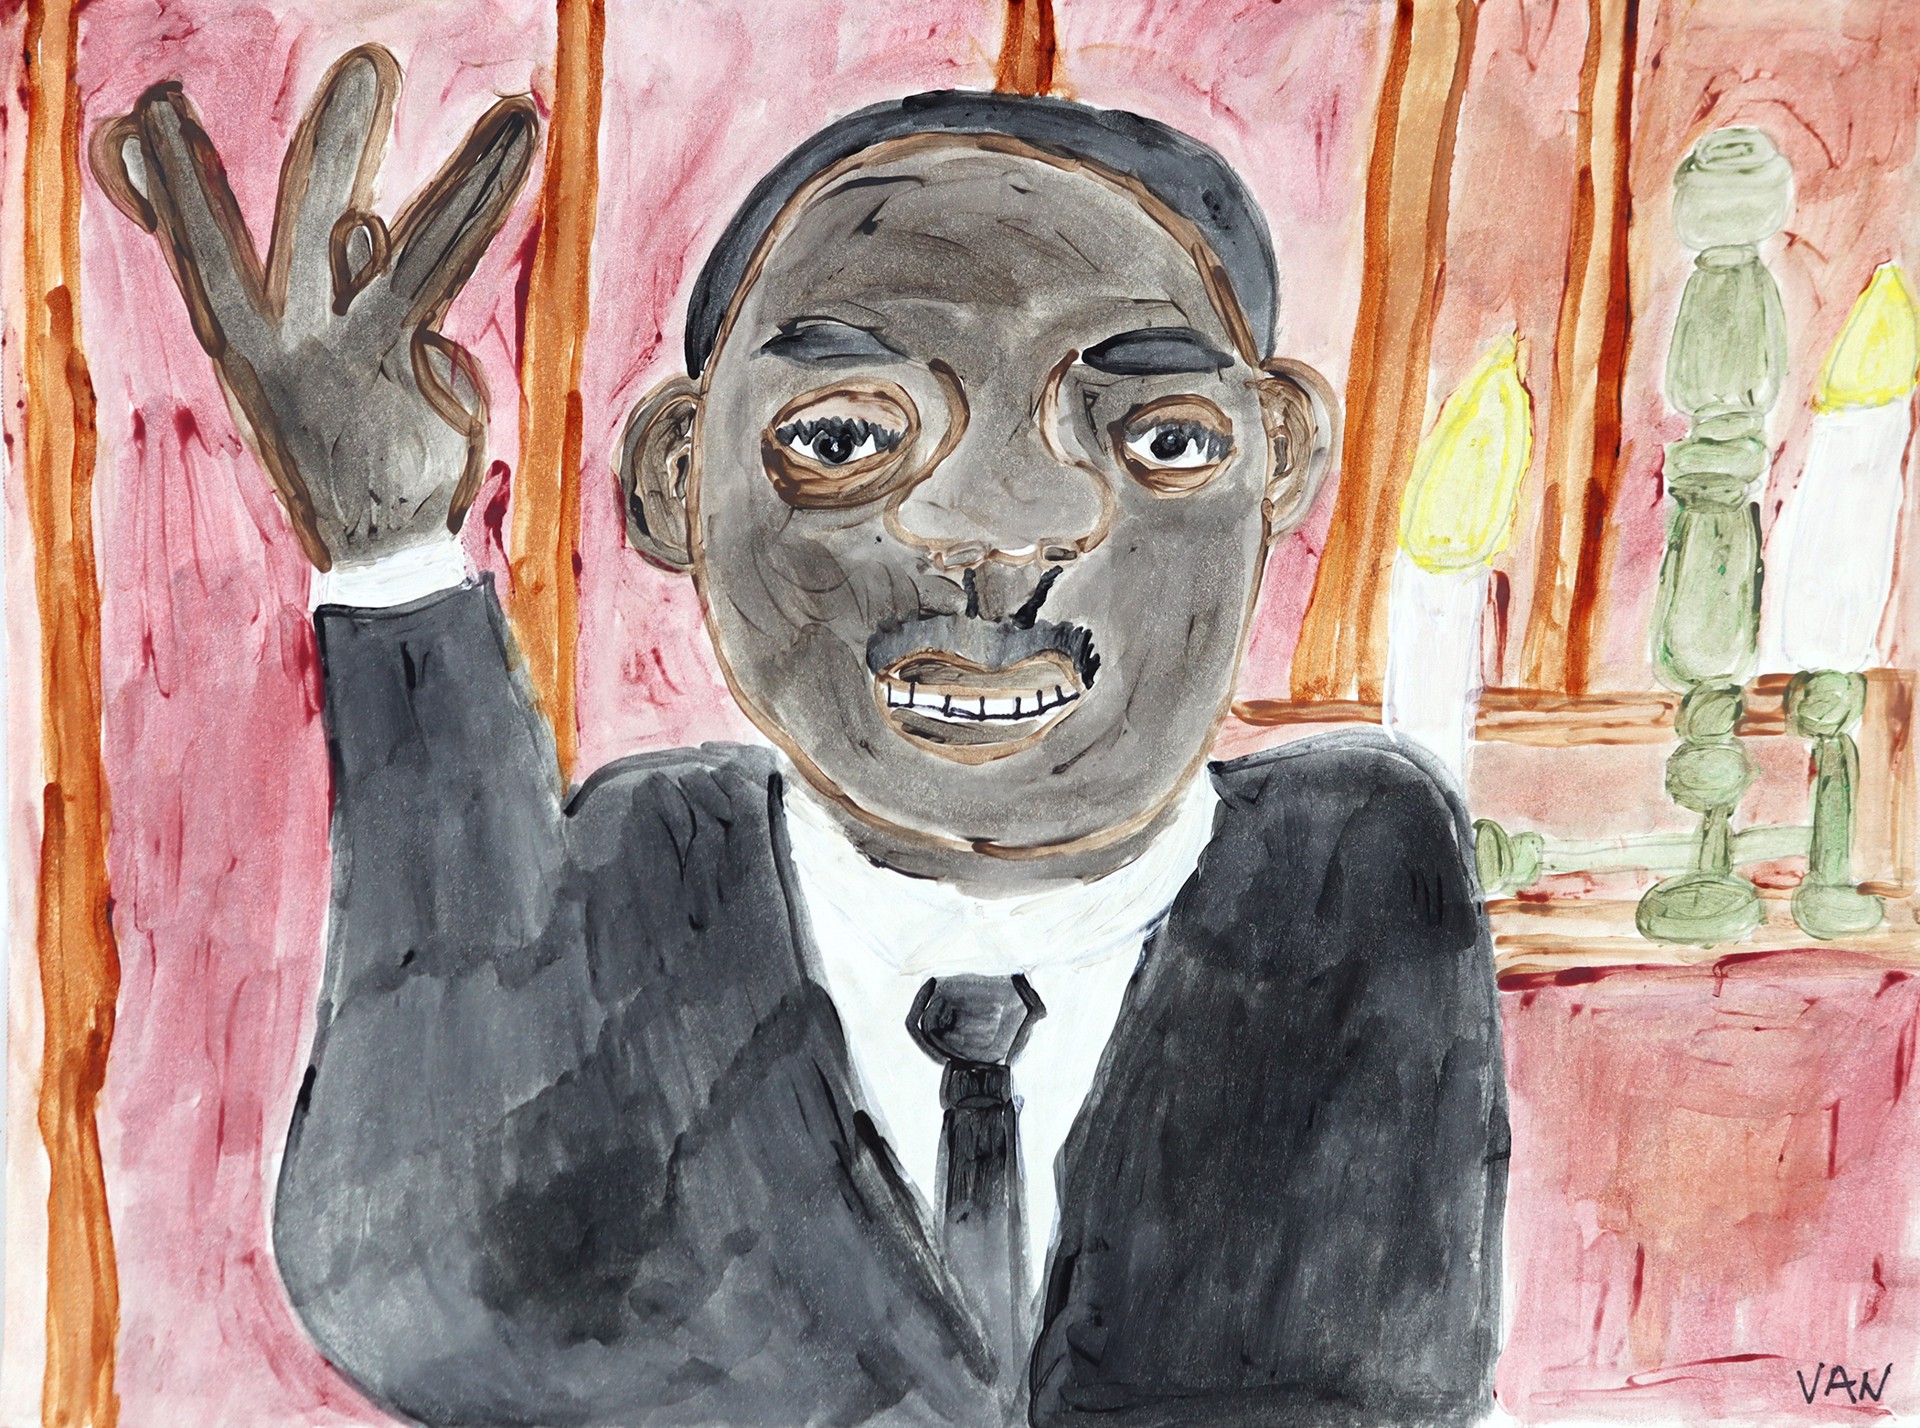 Martin Luther King Jr. by Vanessa Monroe